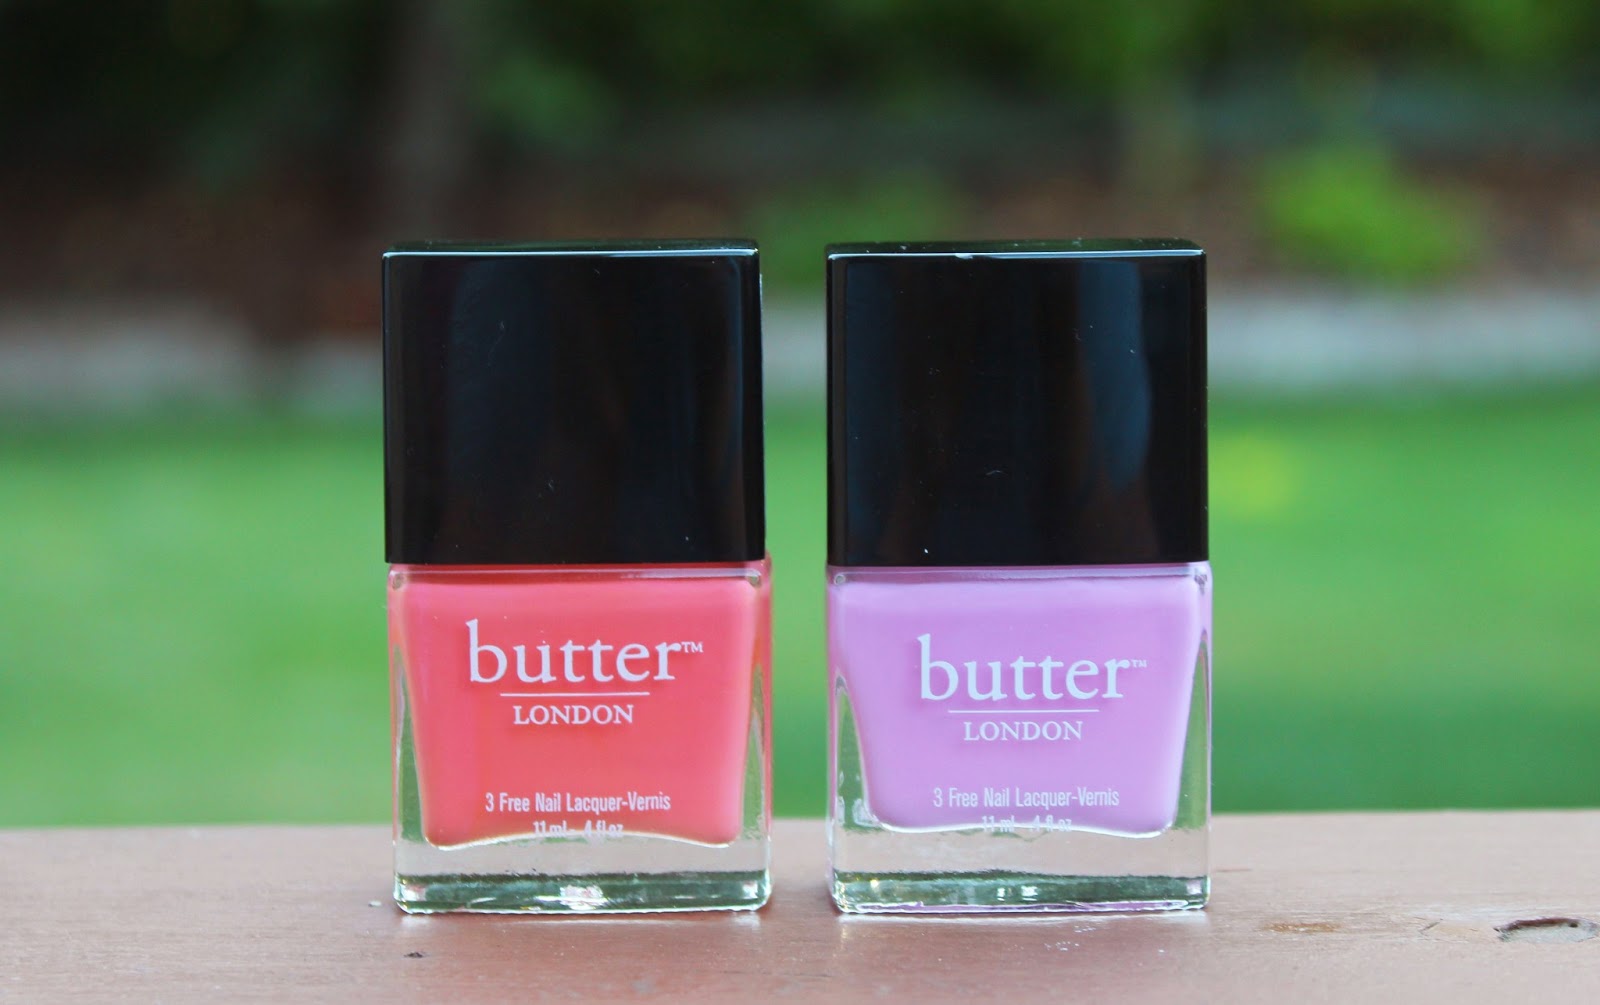 6. Butter London Nail Lacquer in "Fruit Machine" - wide 5